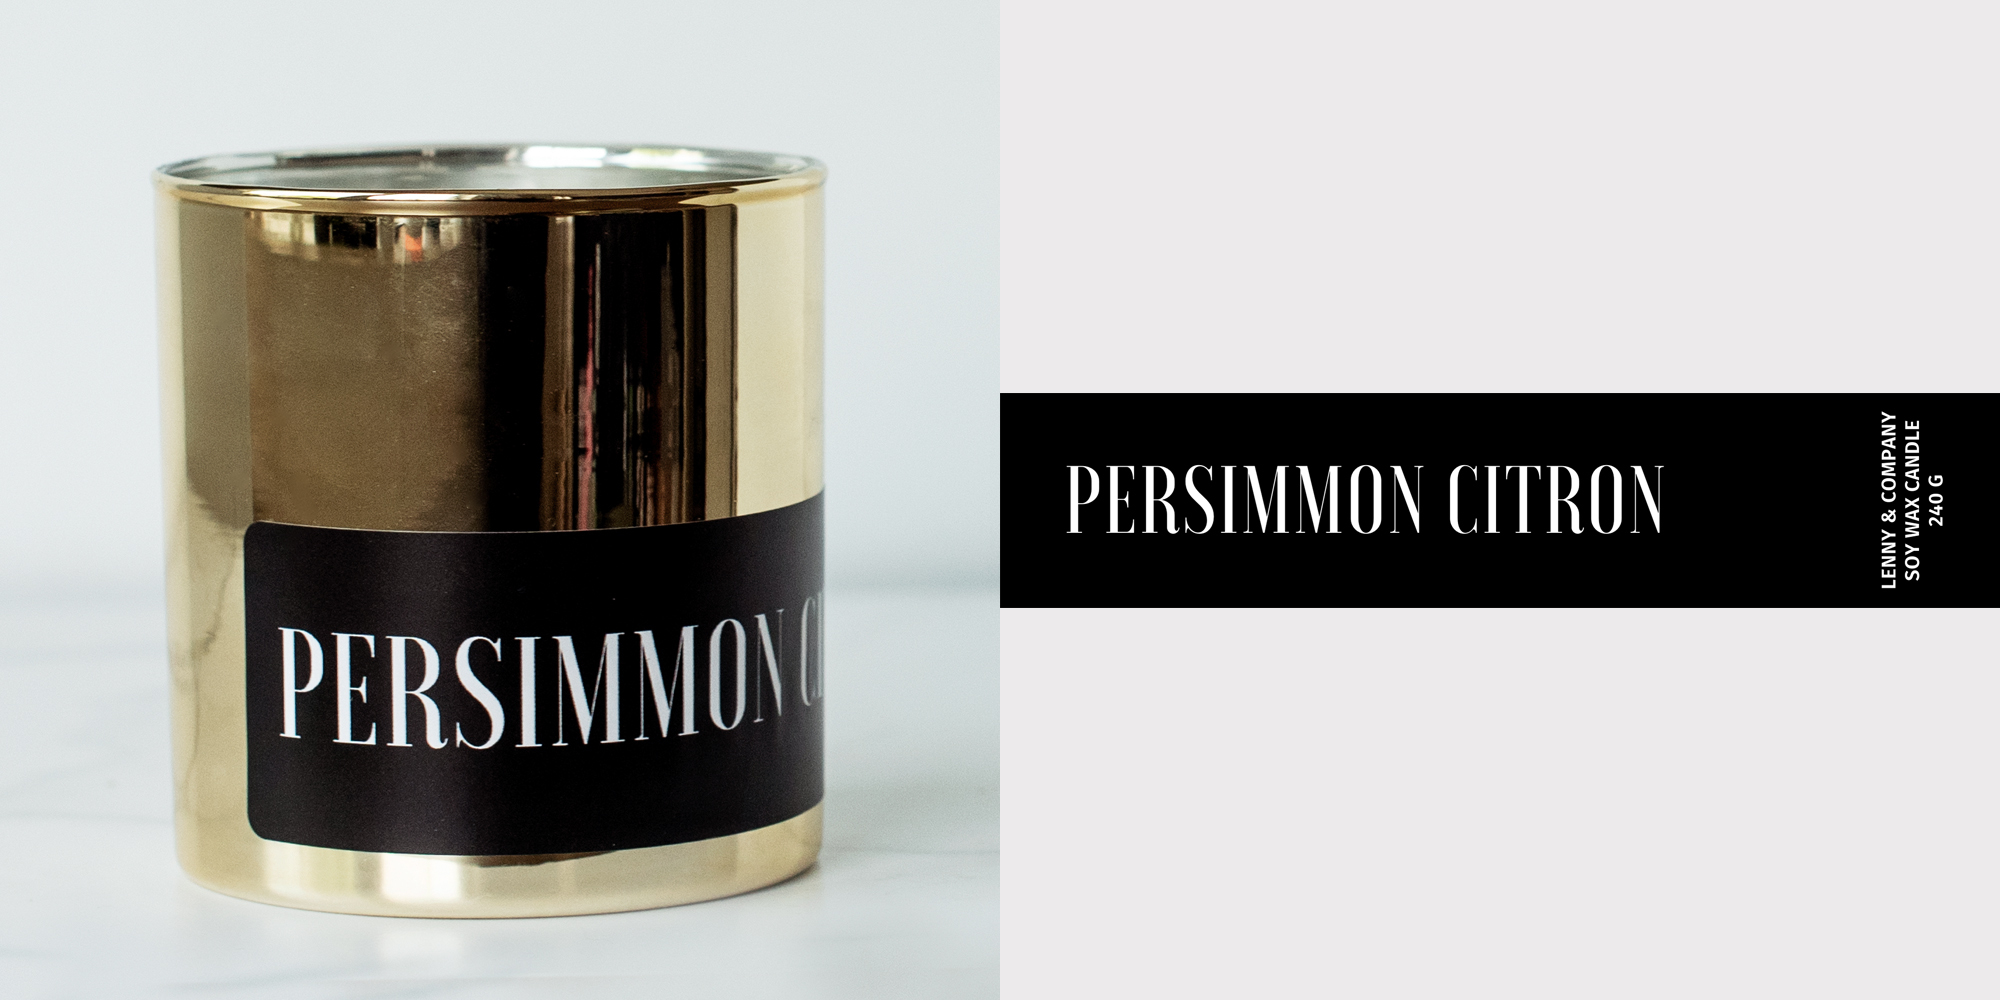 Persimmon Citron fragrance oil candle and label.